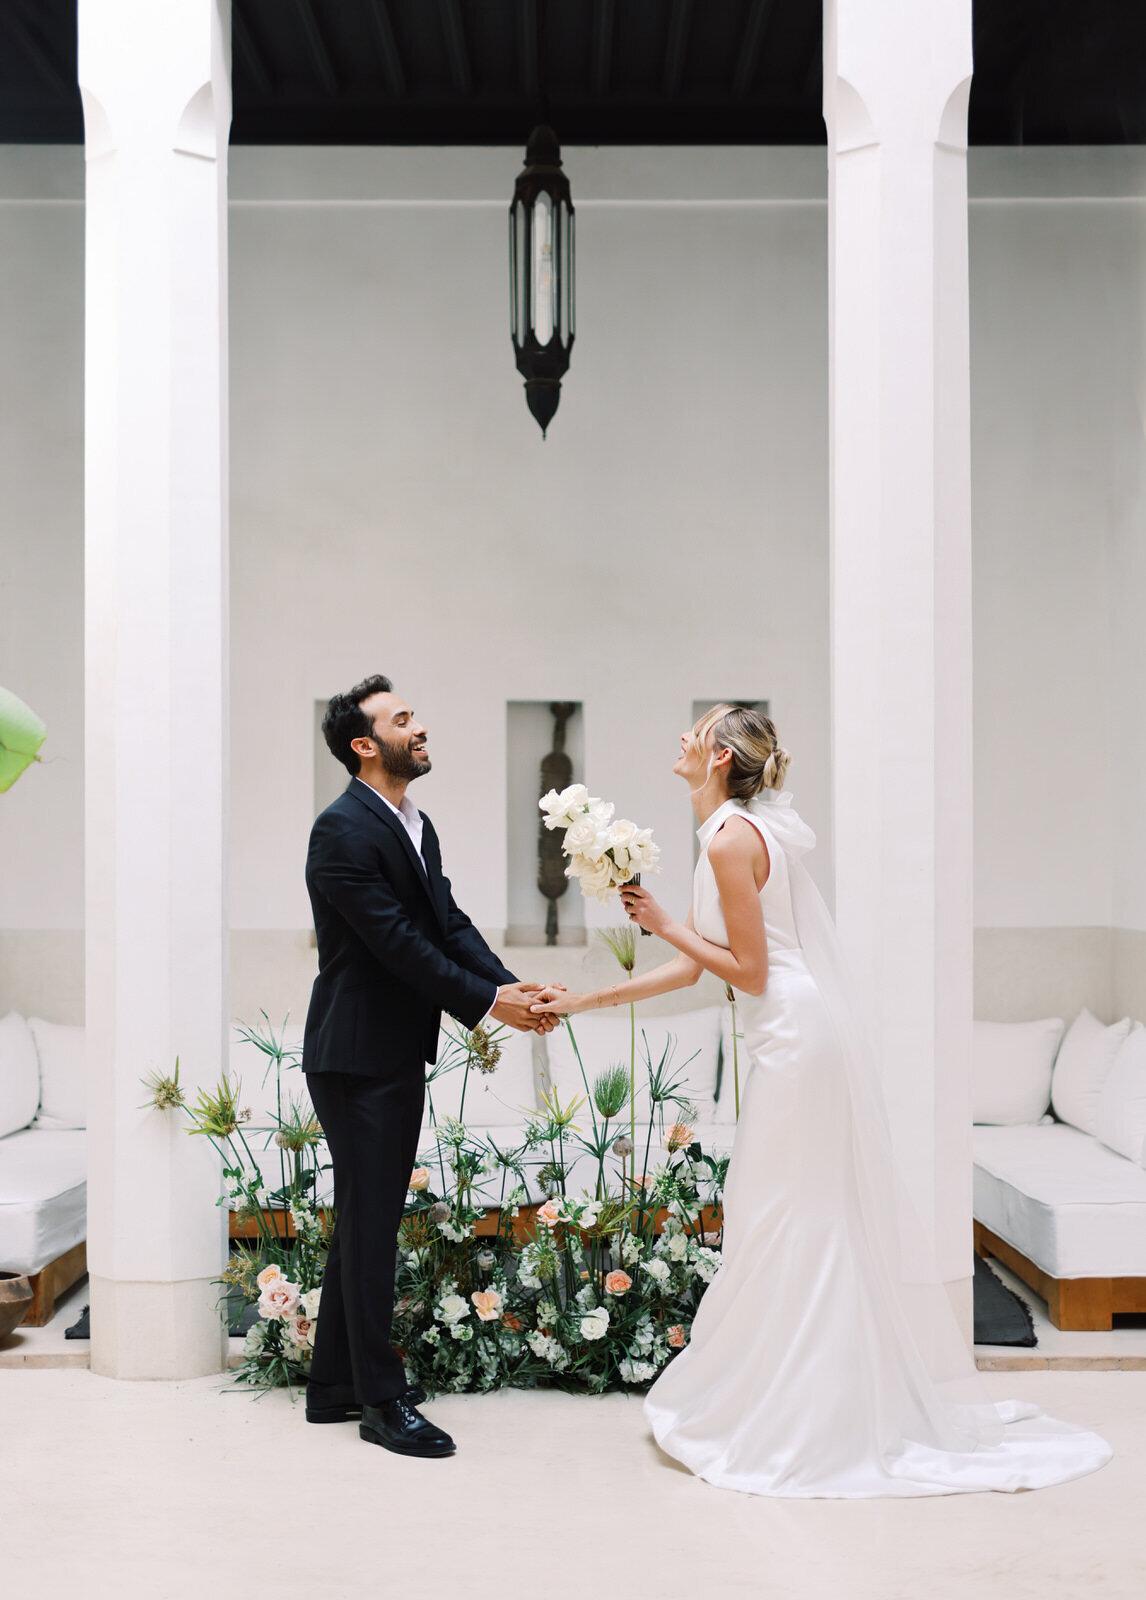 Stylish Elopement Photography in Marrakech 3